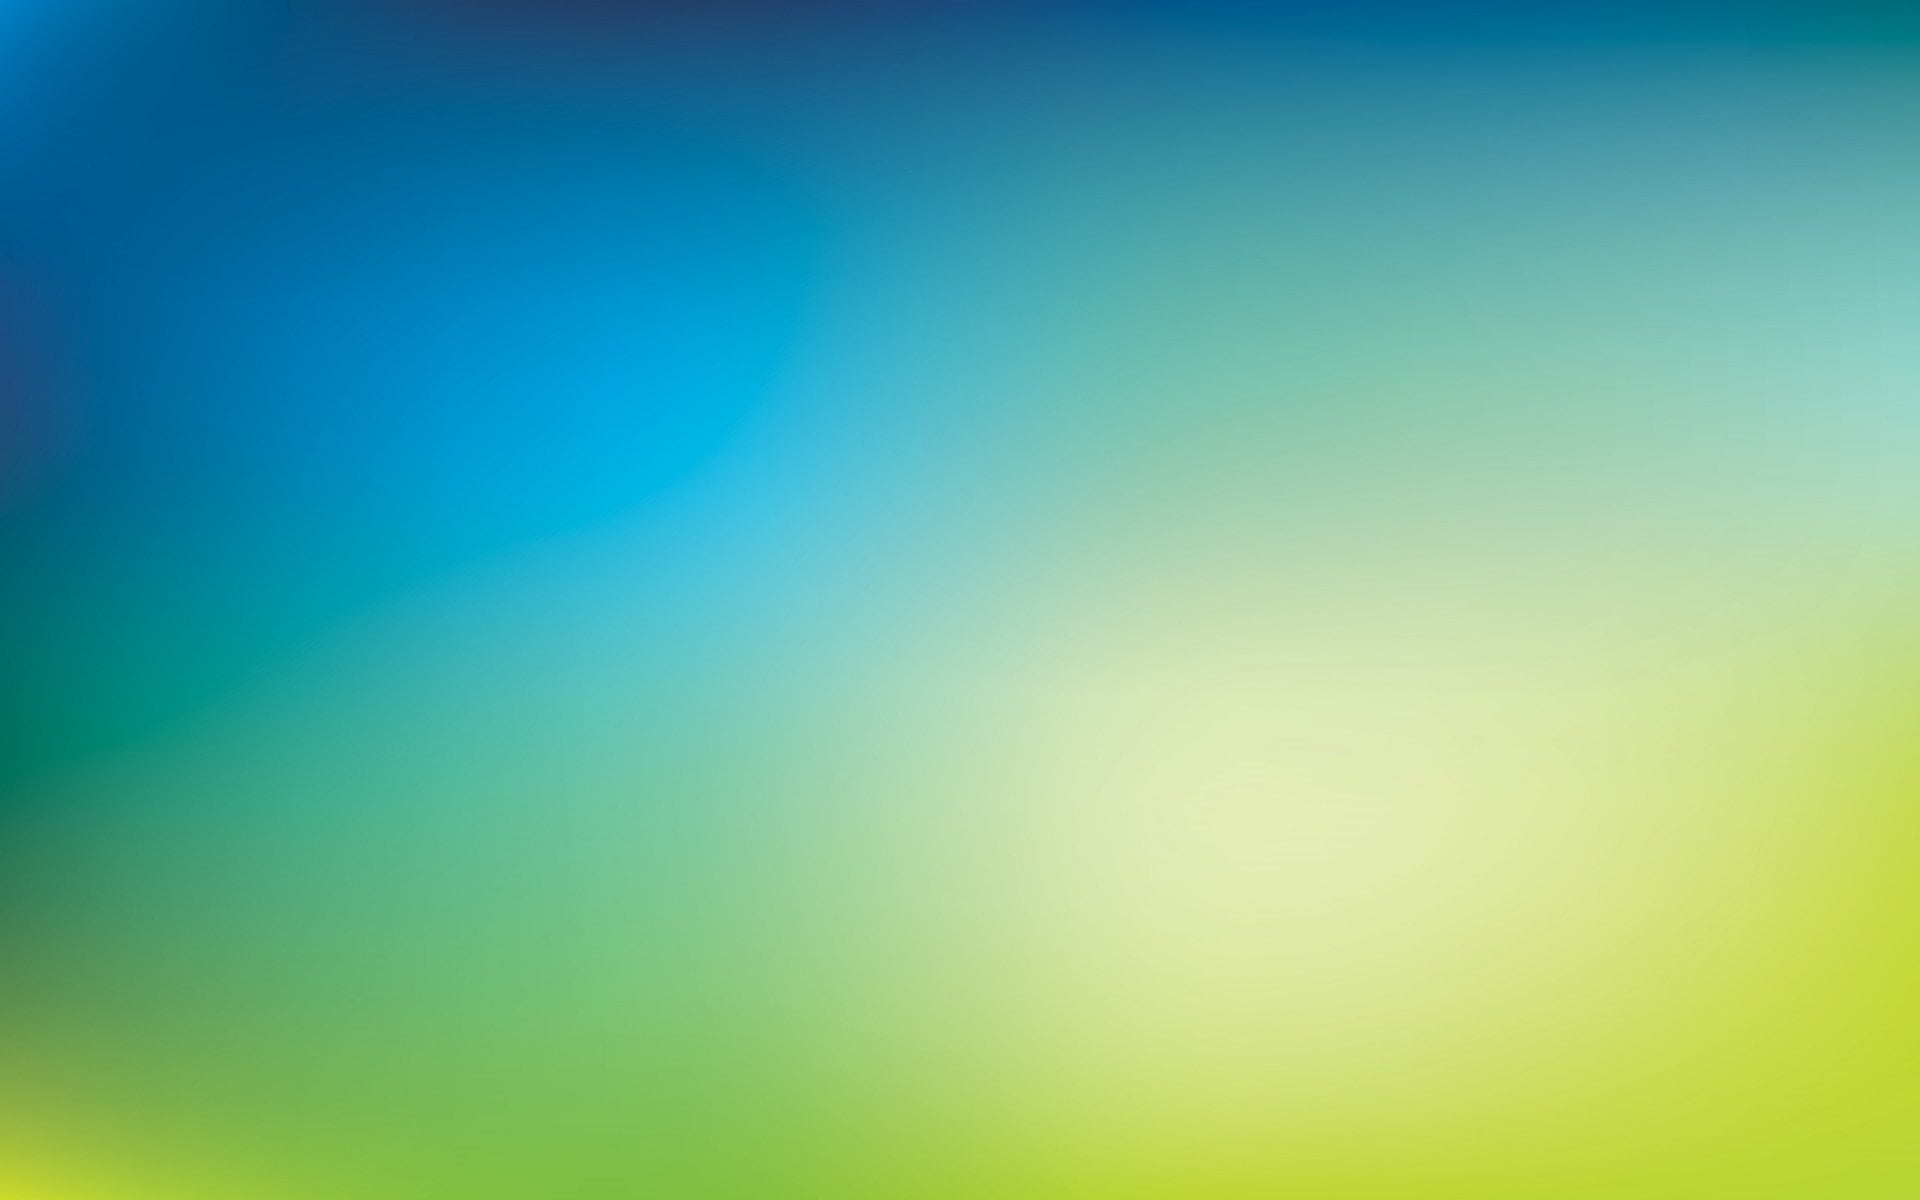 Abstract, Blur, Blue, Green, backgrounds, no people, light - natural phenomenon